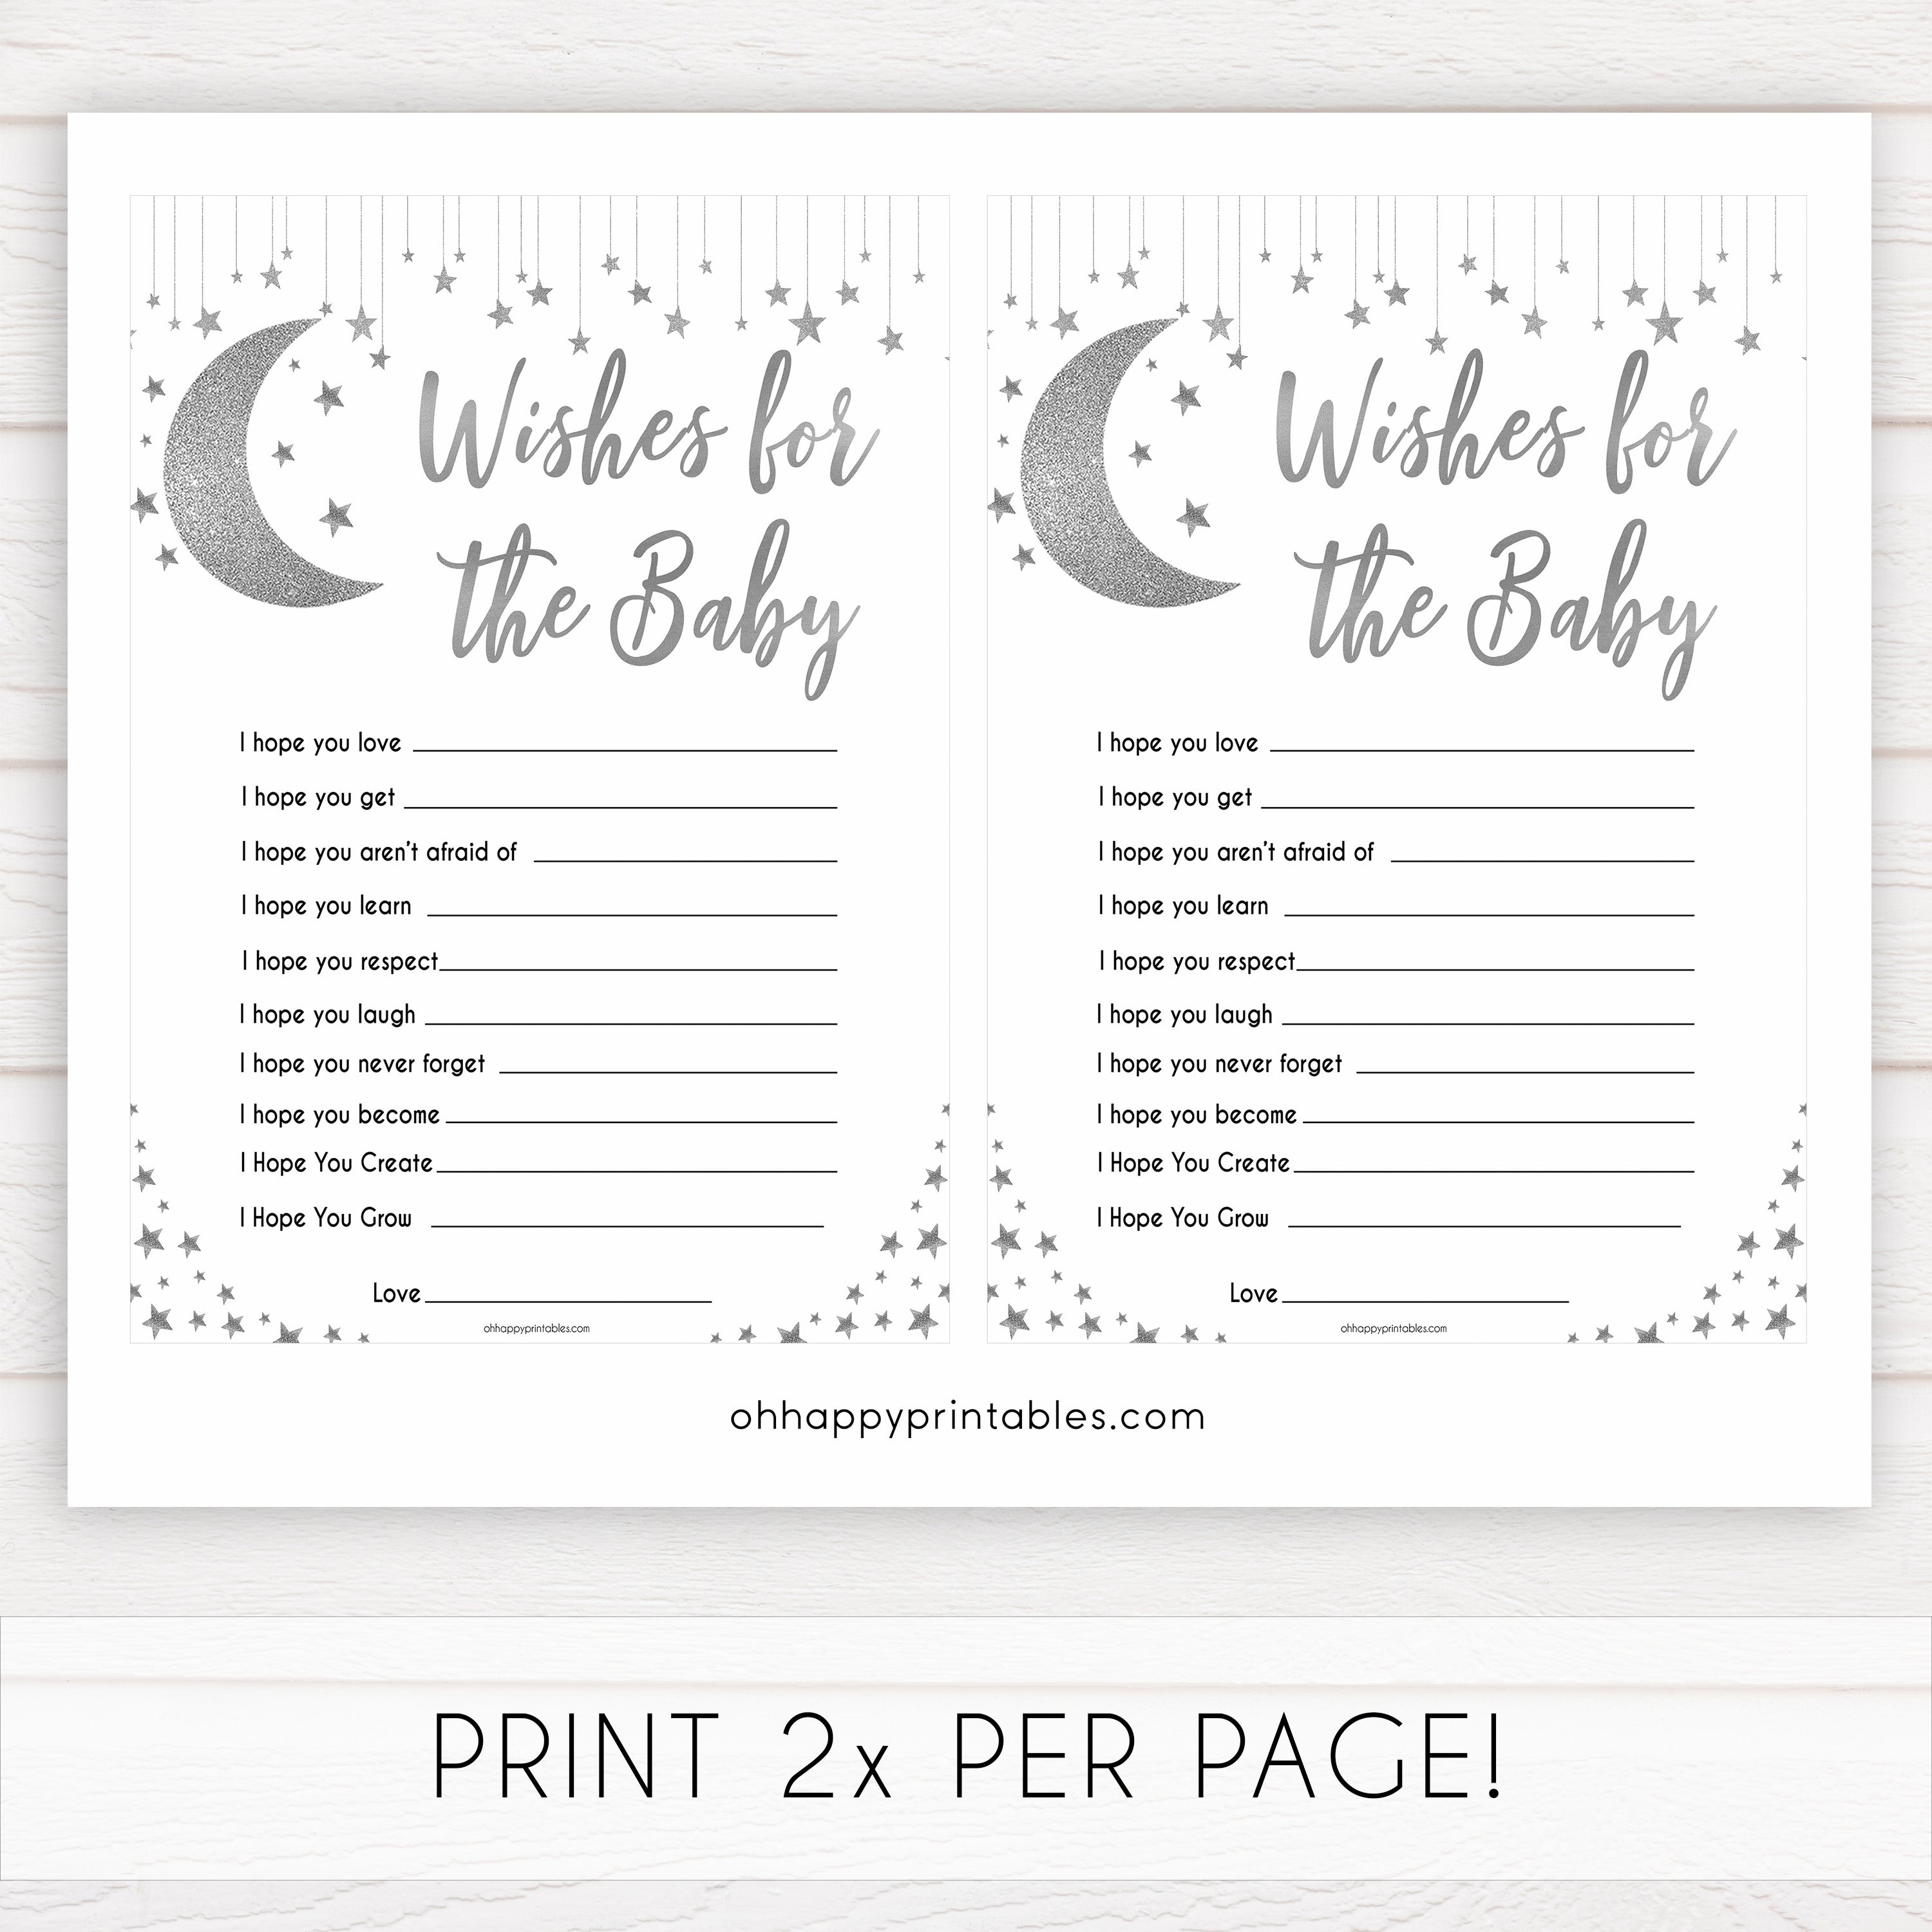 Silver little star, wishes for the baby baby games, baby shower games, printable baby games, fun baby games, twinkle little star games, baby games, fun baby shower ideas, baby shower ideas